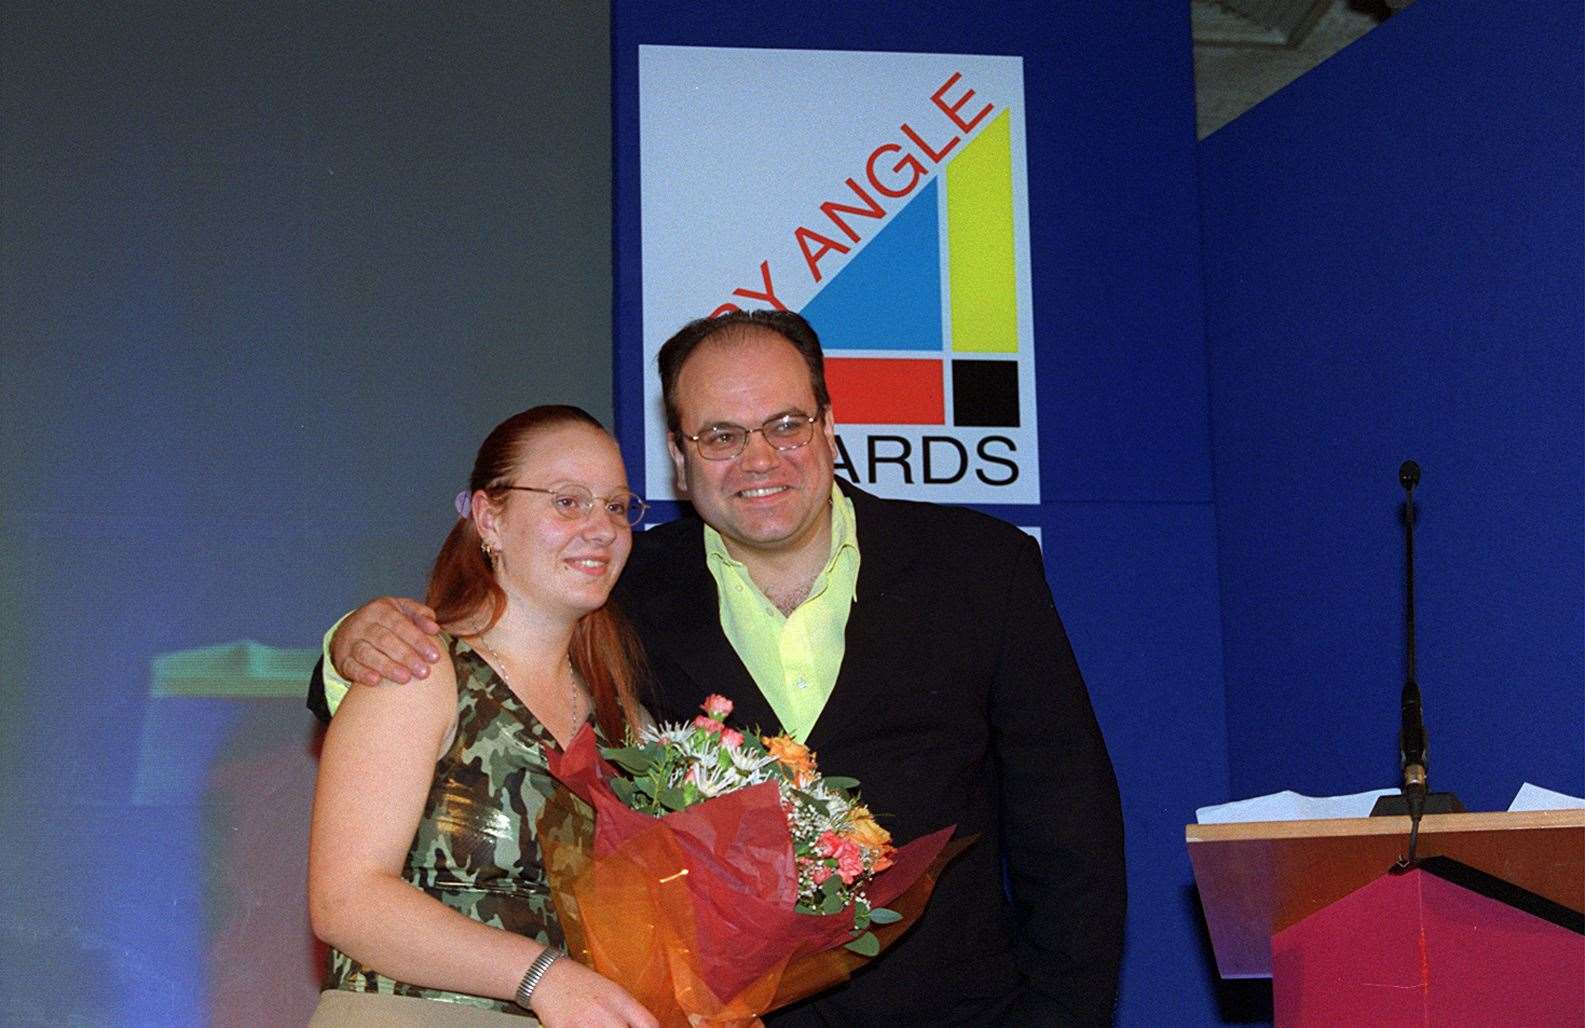 Another Eastenders star, Shaun Williamson, who played Barry, presented an award to 14-year-old Georgina Rabbitt at the Crafts for Christmas event at Kent County Showground in 2001